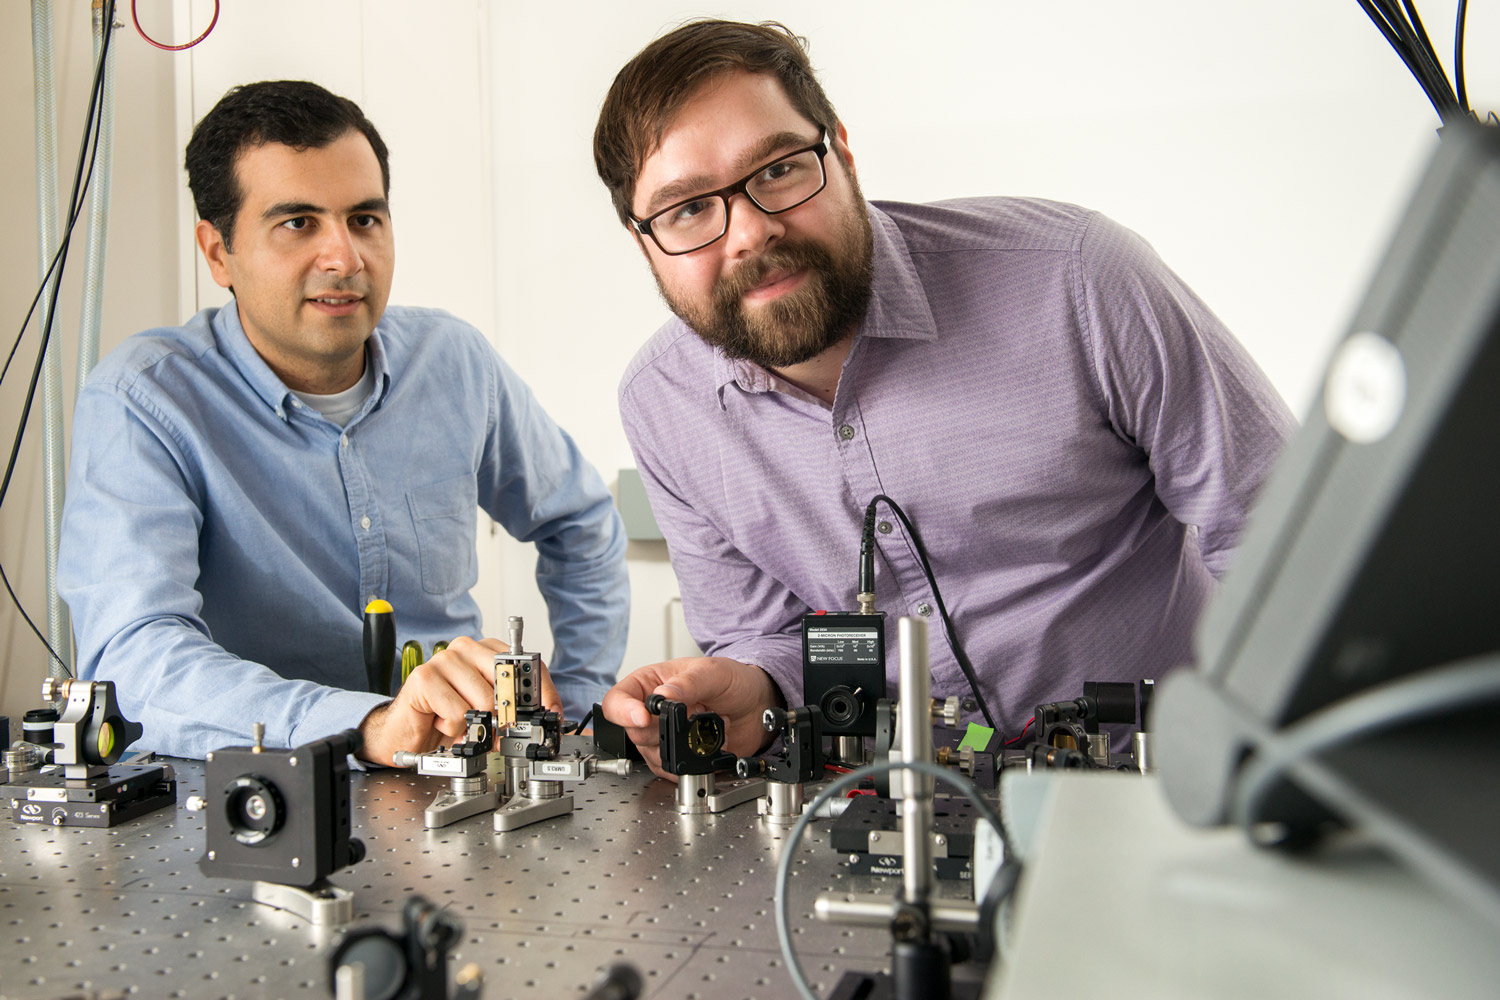 Alireza Marandi, left, and Marc Jankowski prepare to carry out experiments at the optical bench